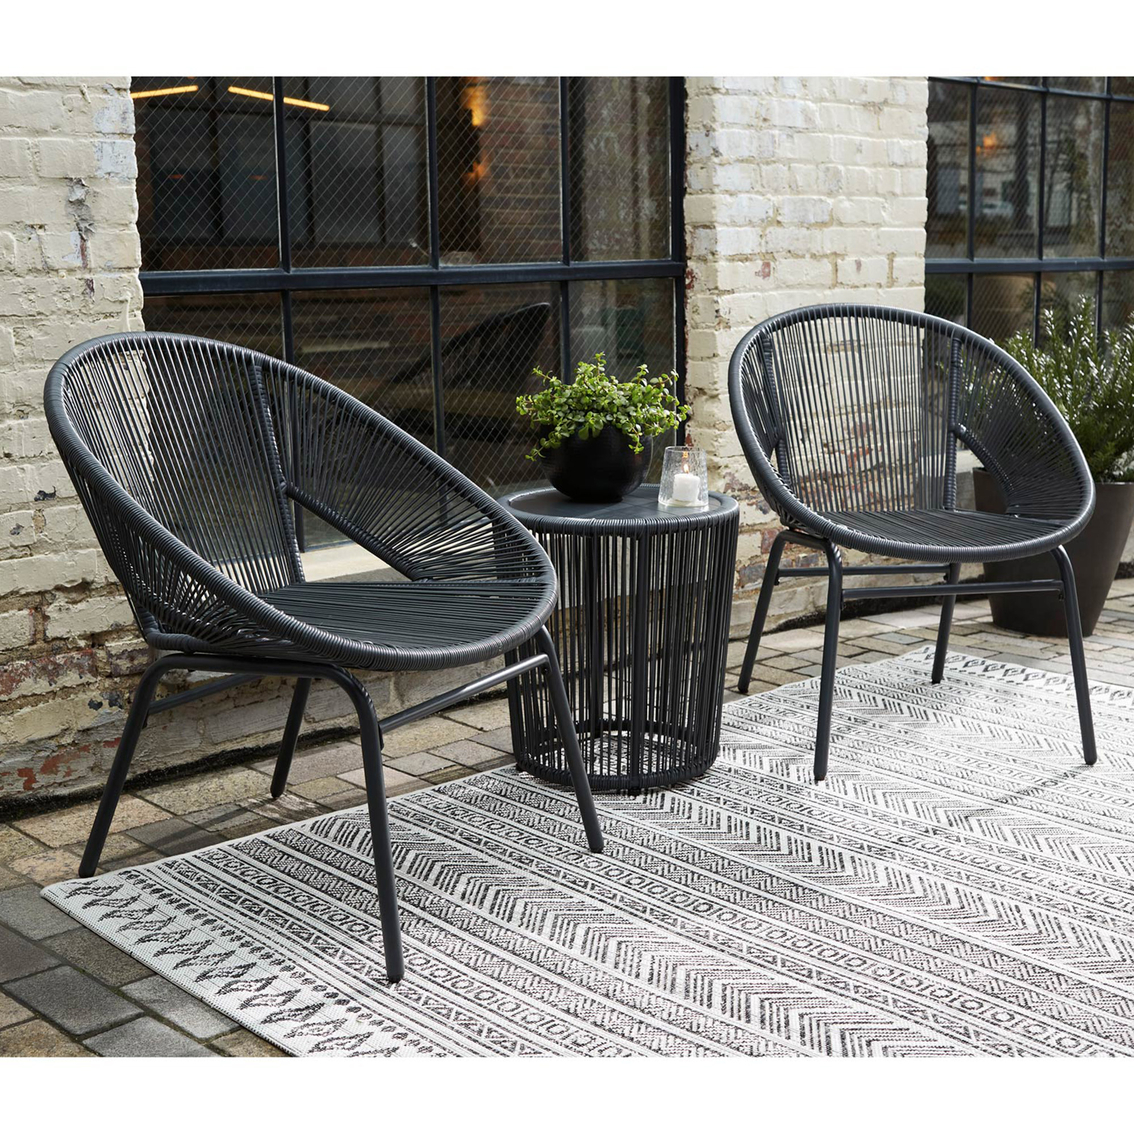 Signature Design by Ashley Mandarin Cape 3 pc. Outdoor Table Set - Image 7 of 7